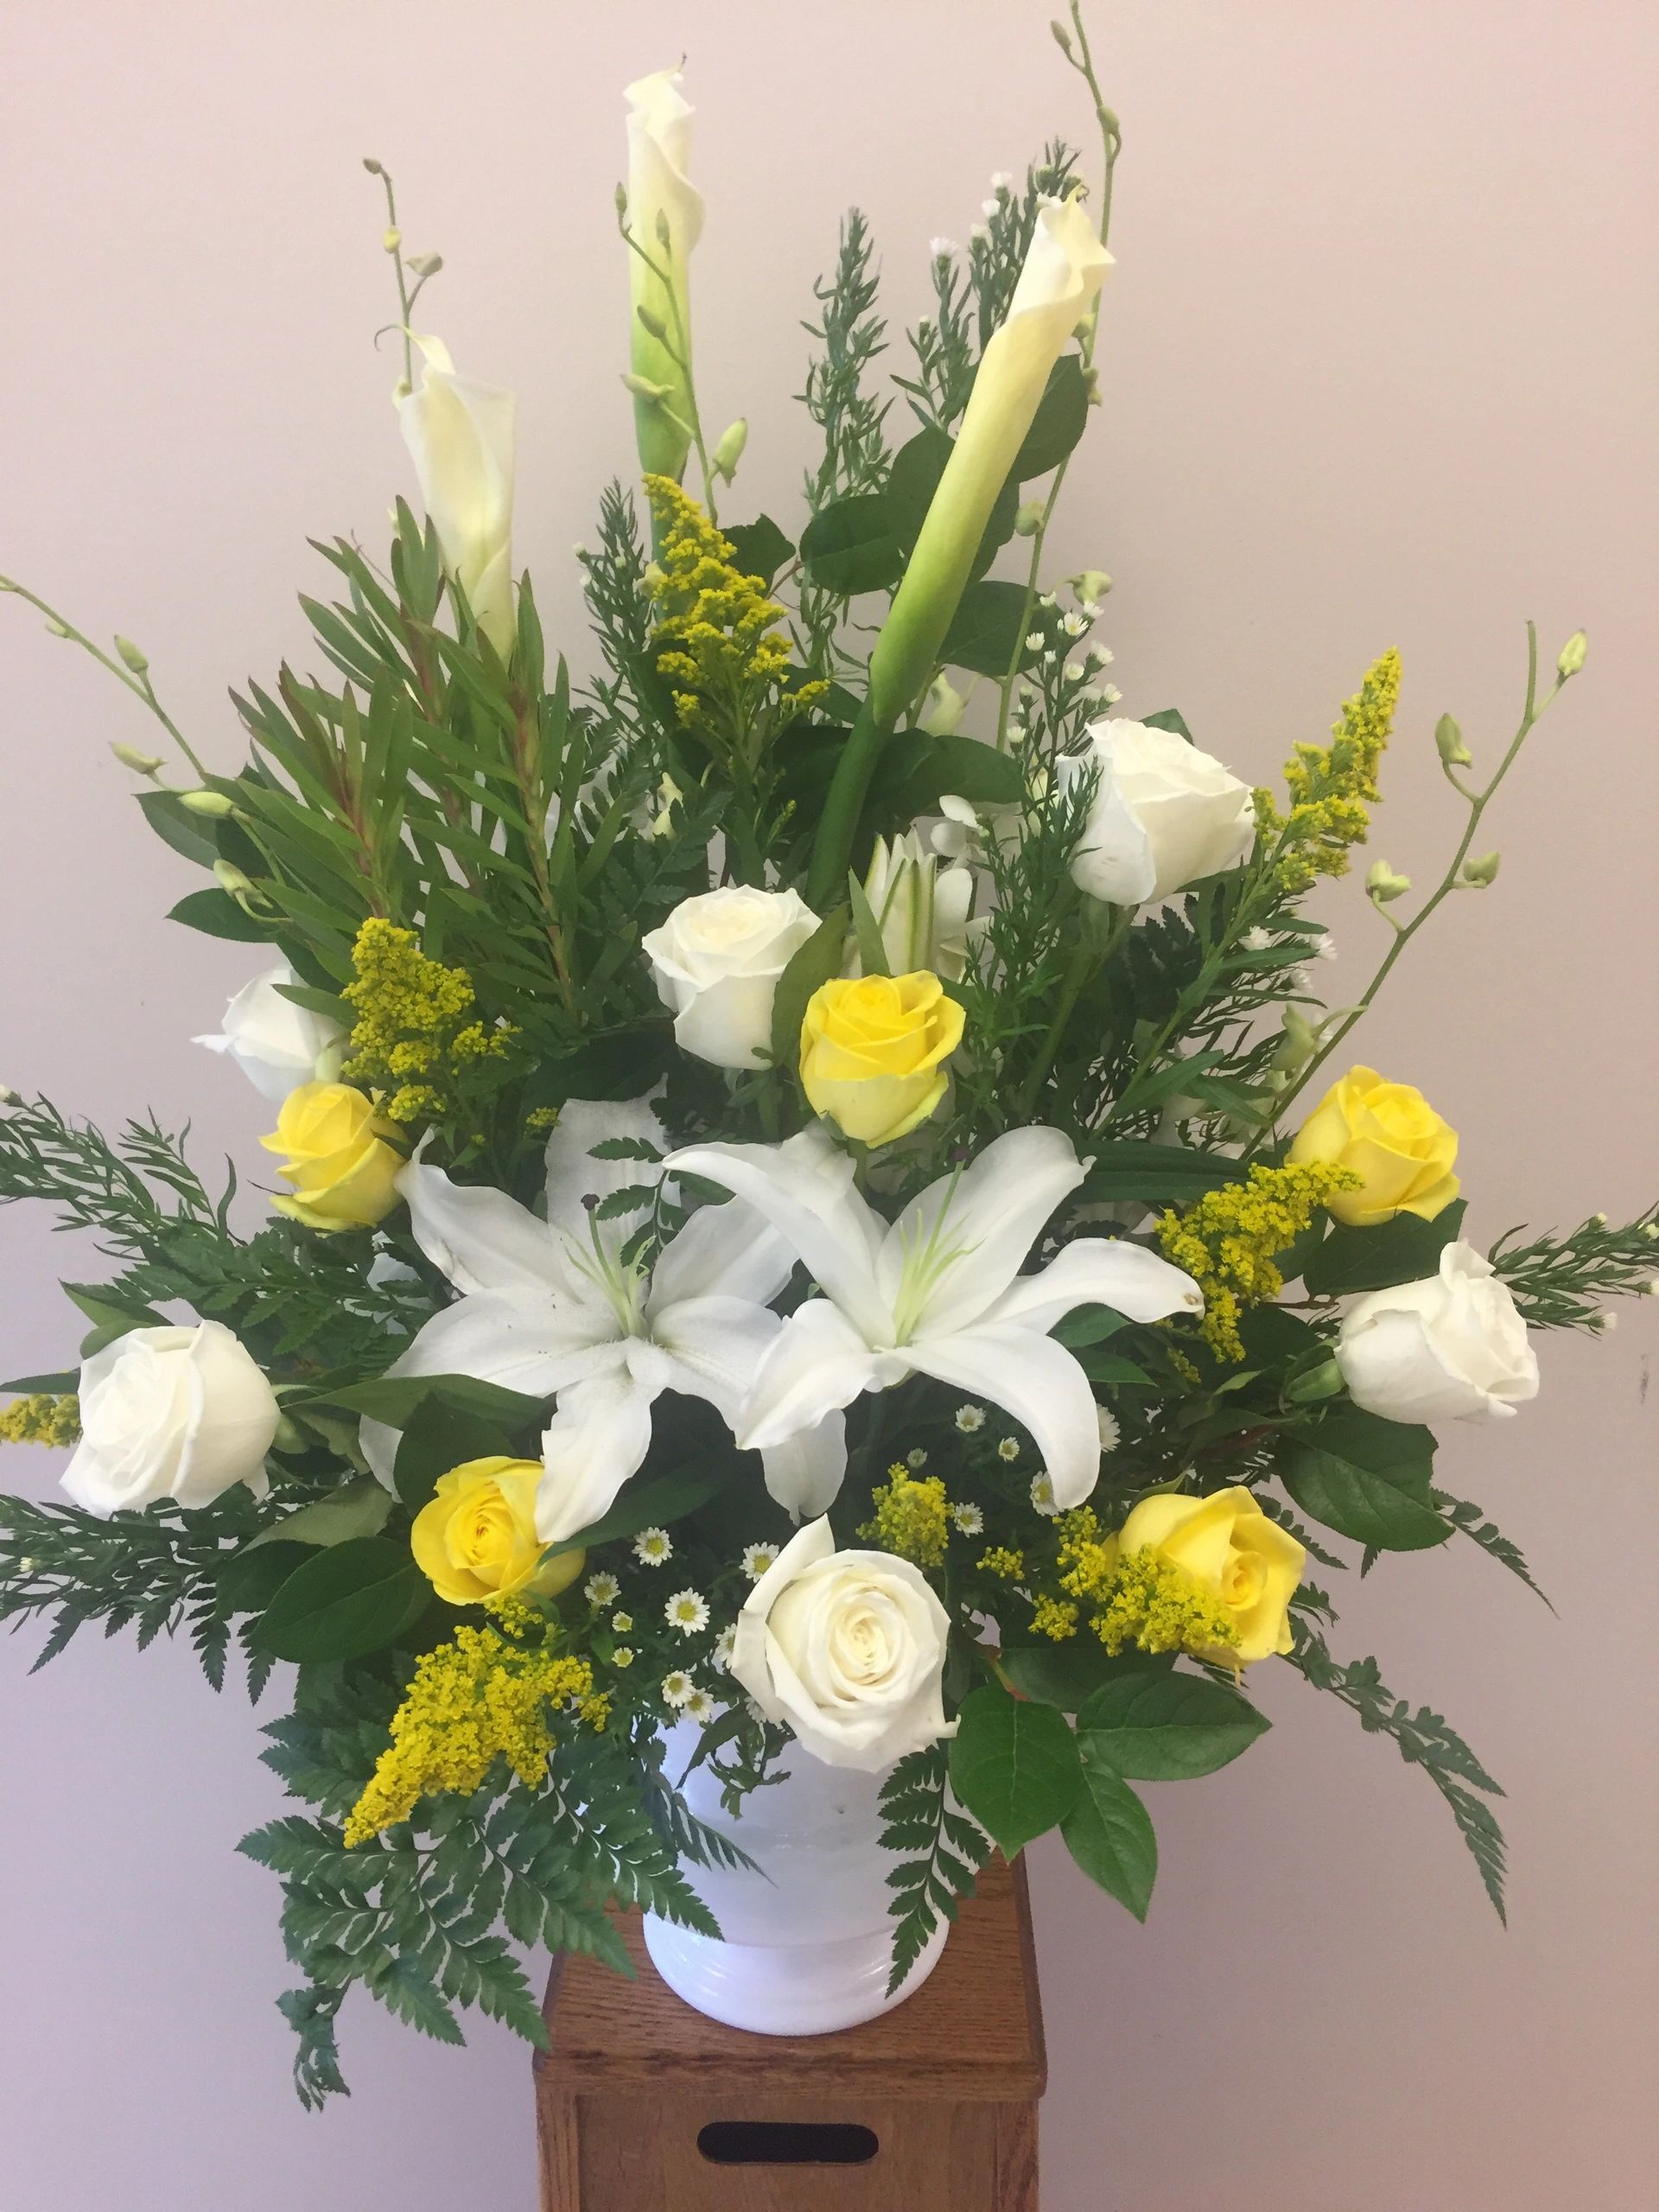 A white vase with yellow and white sympathy flowers